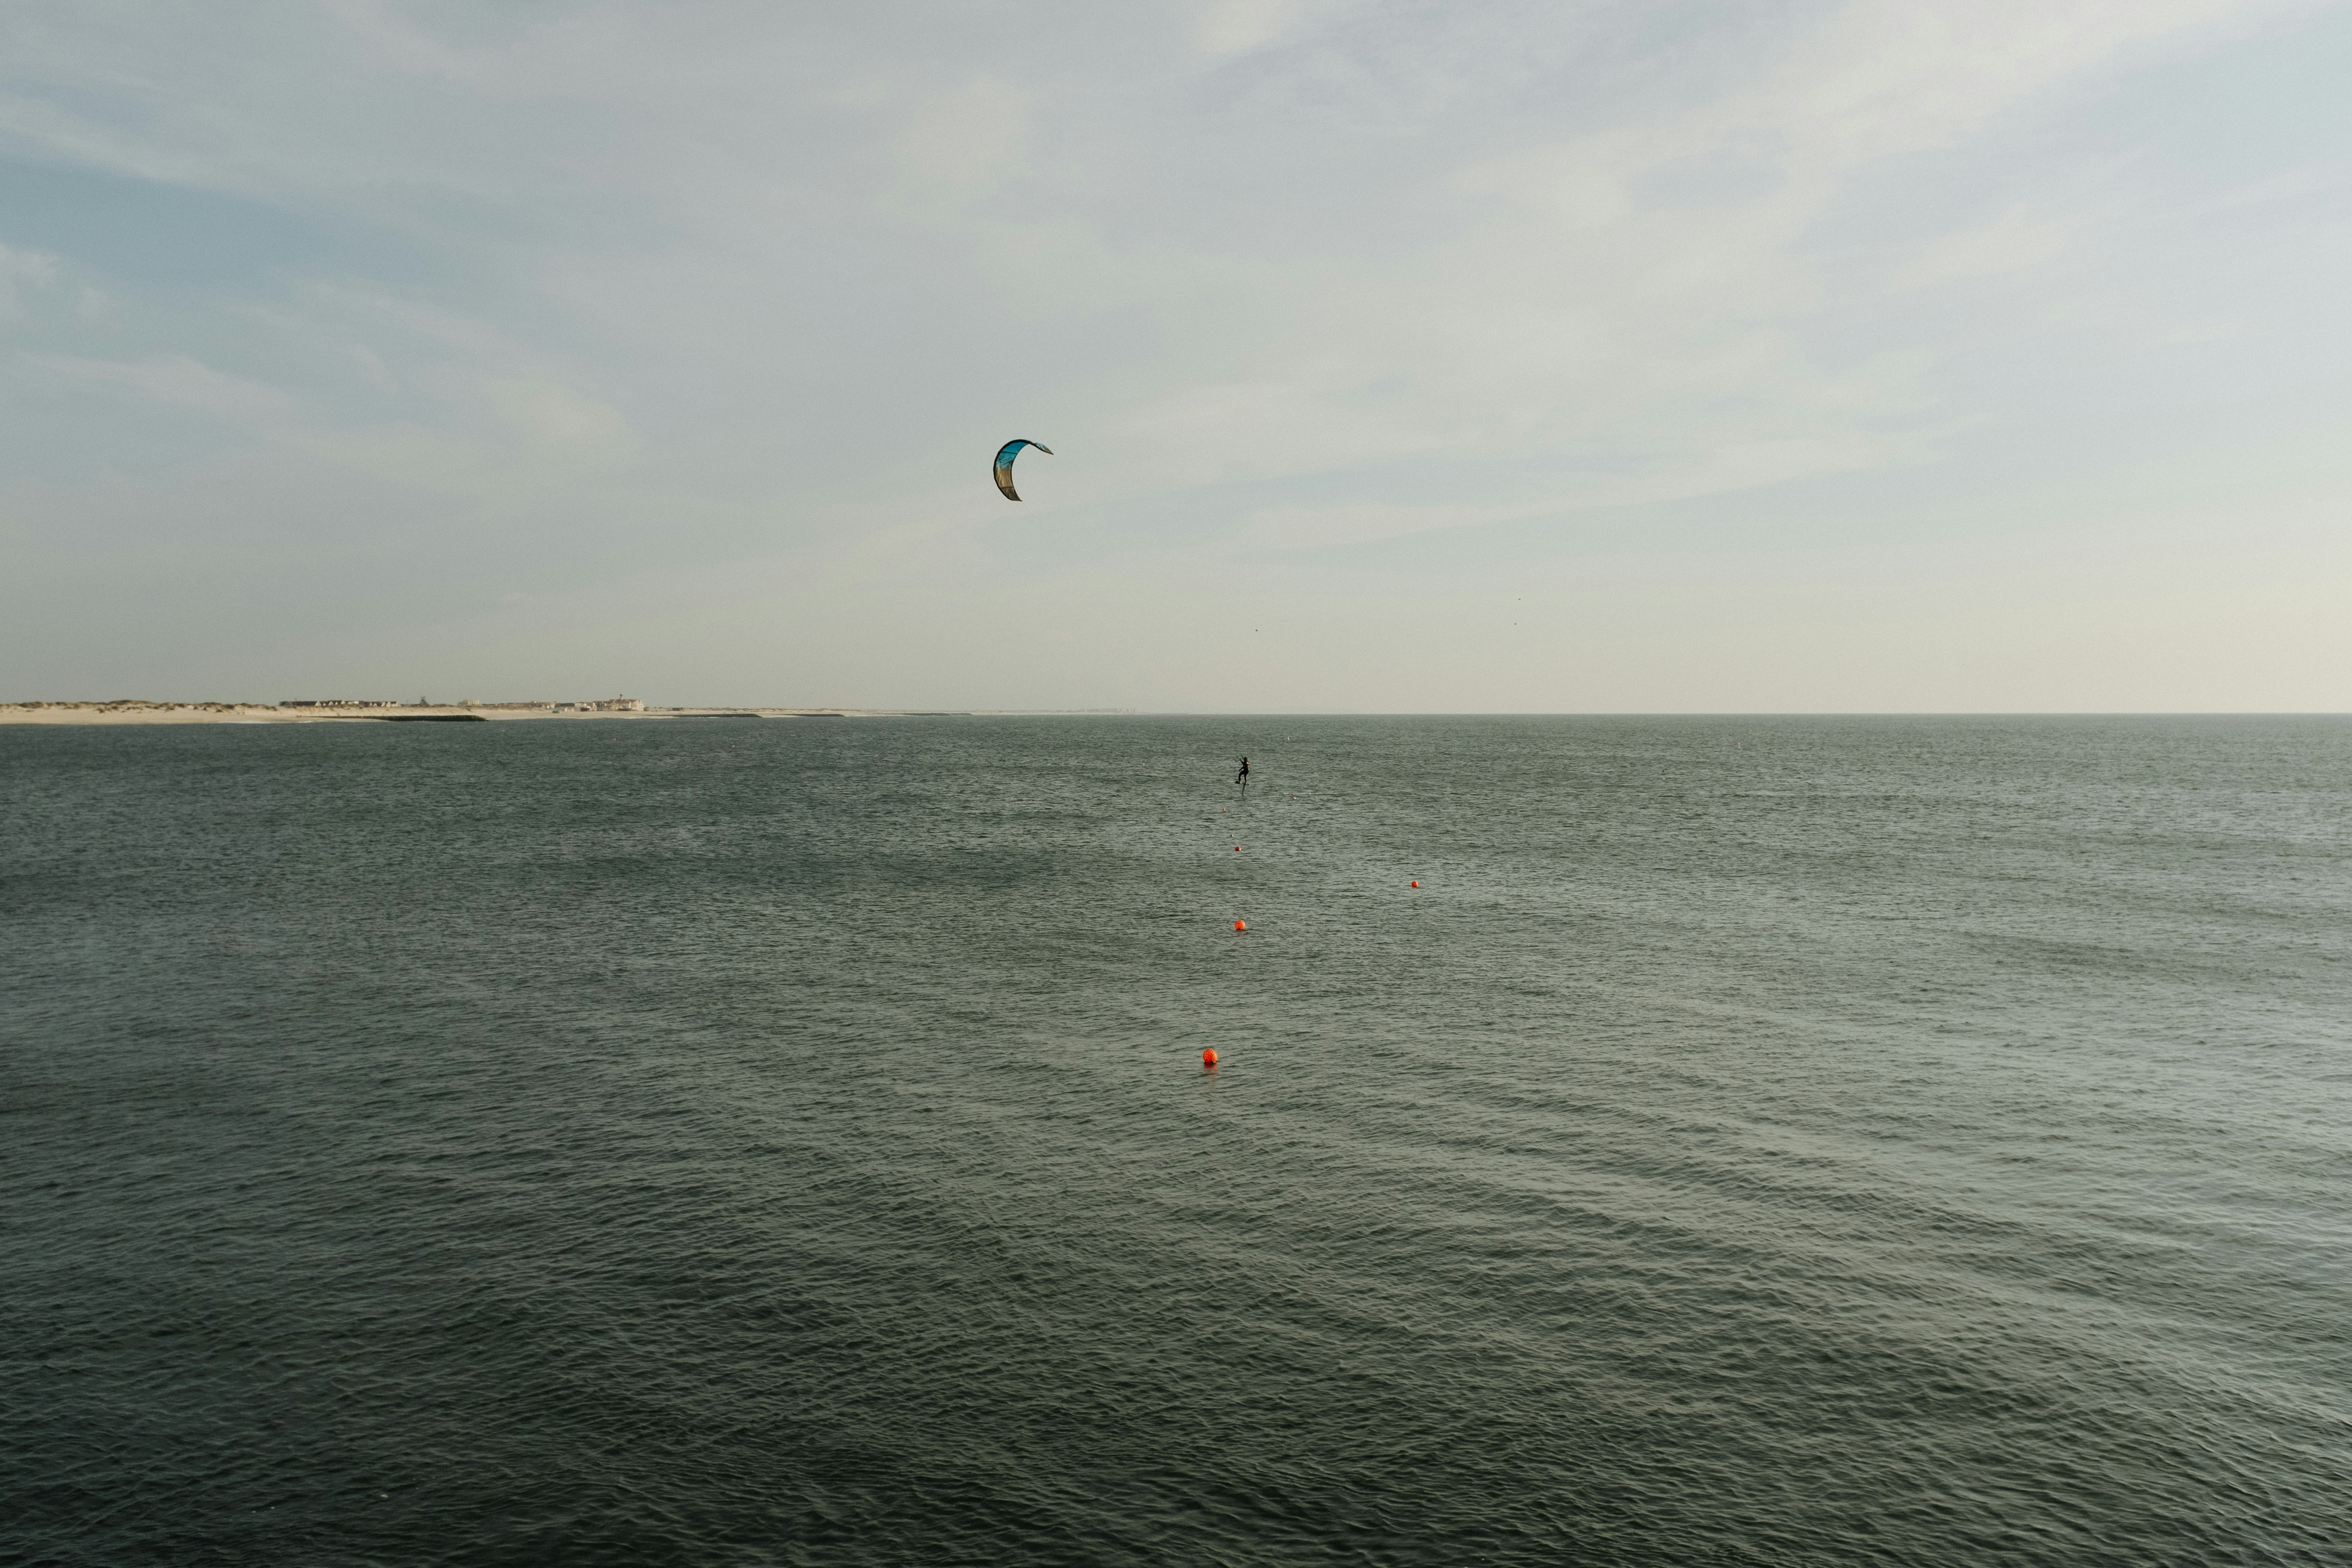 person in red and white parachute over sea during daytime